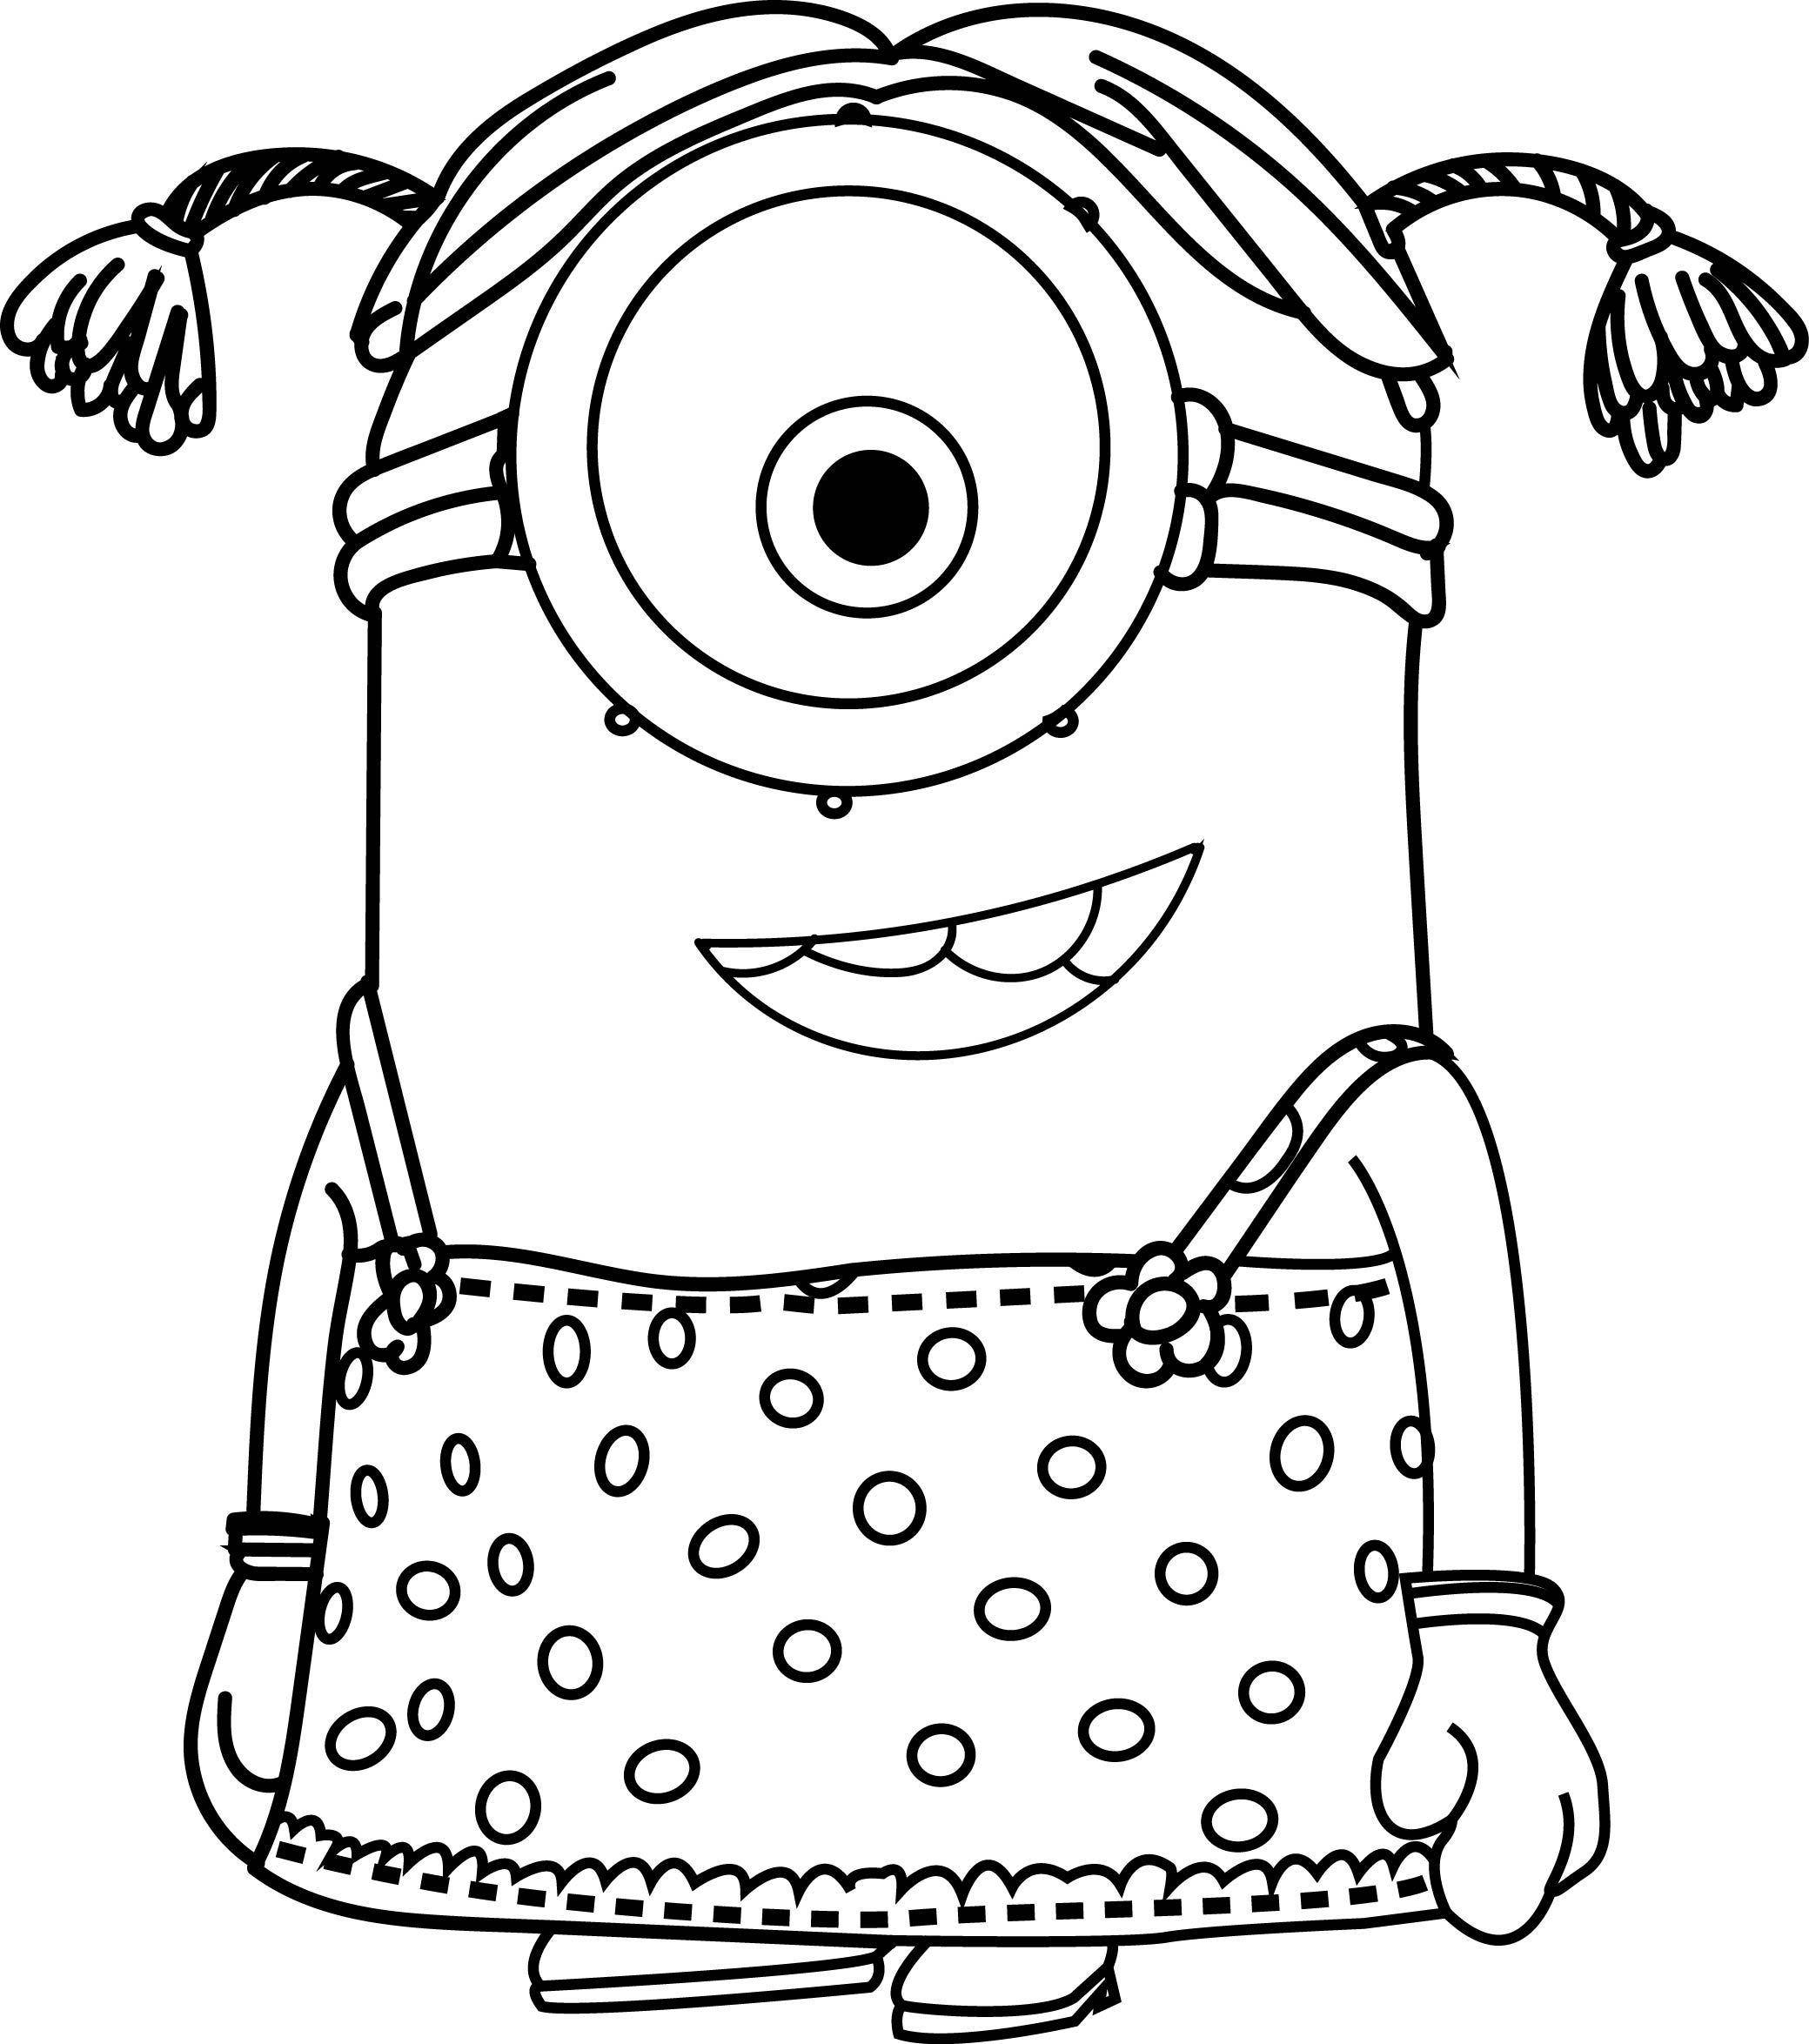 baby-minion-coloring-pages-at-getcolorings-free-printable-colorings-pages-to-print-and-color